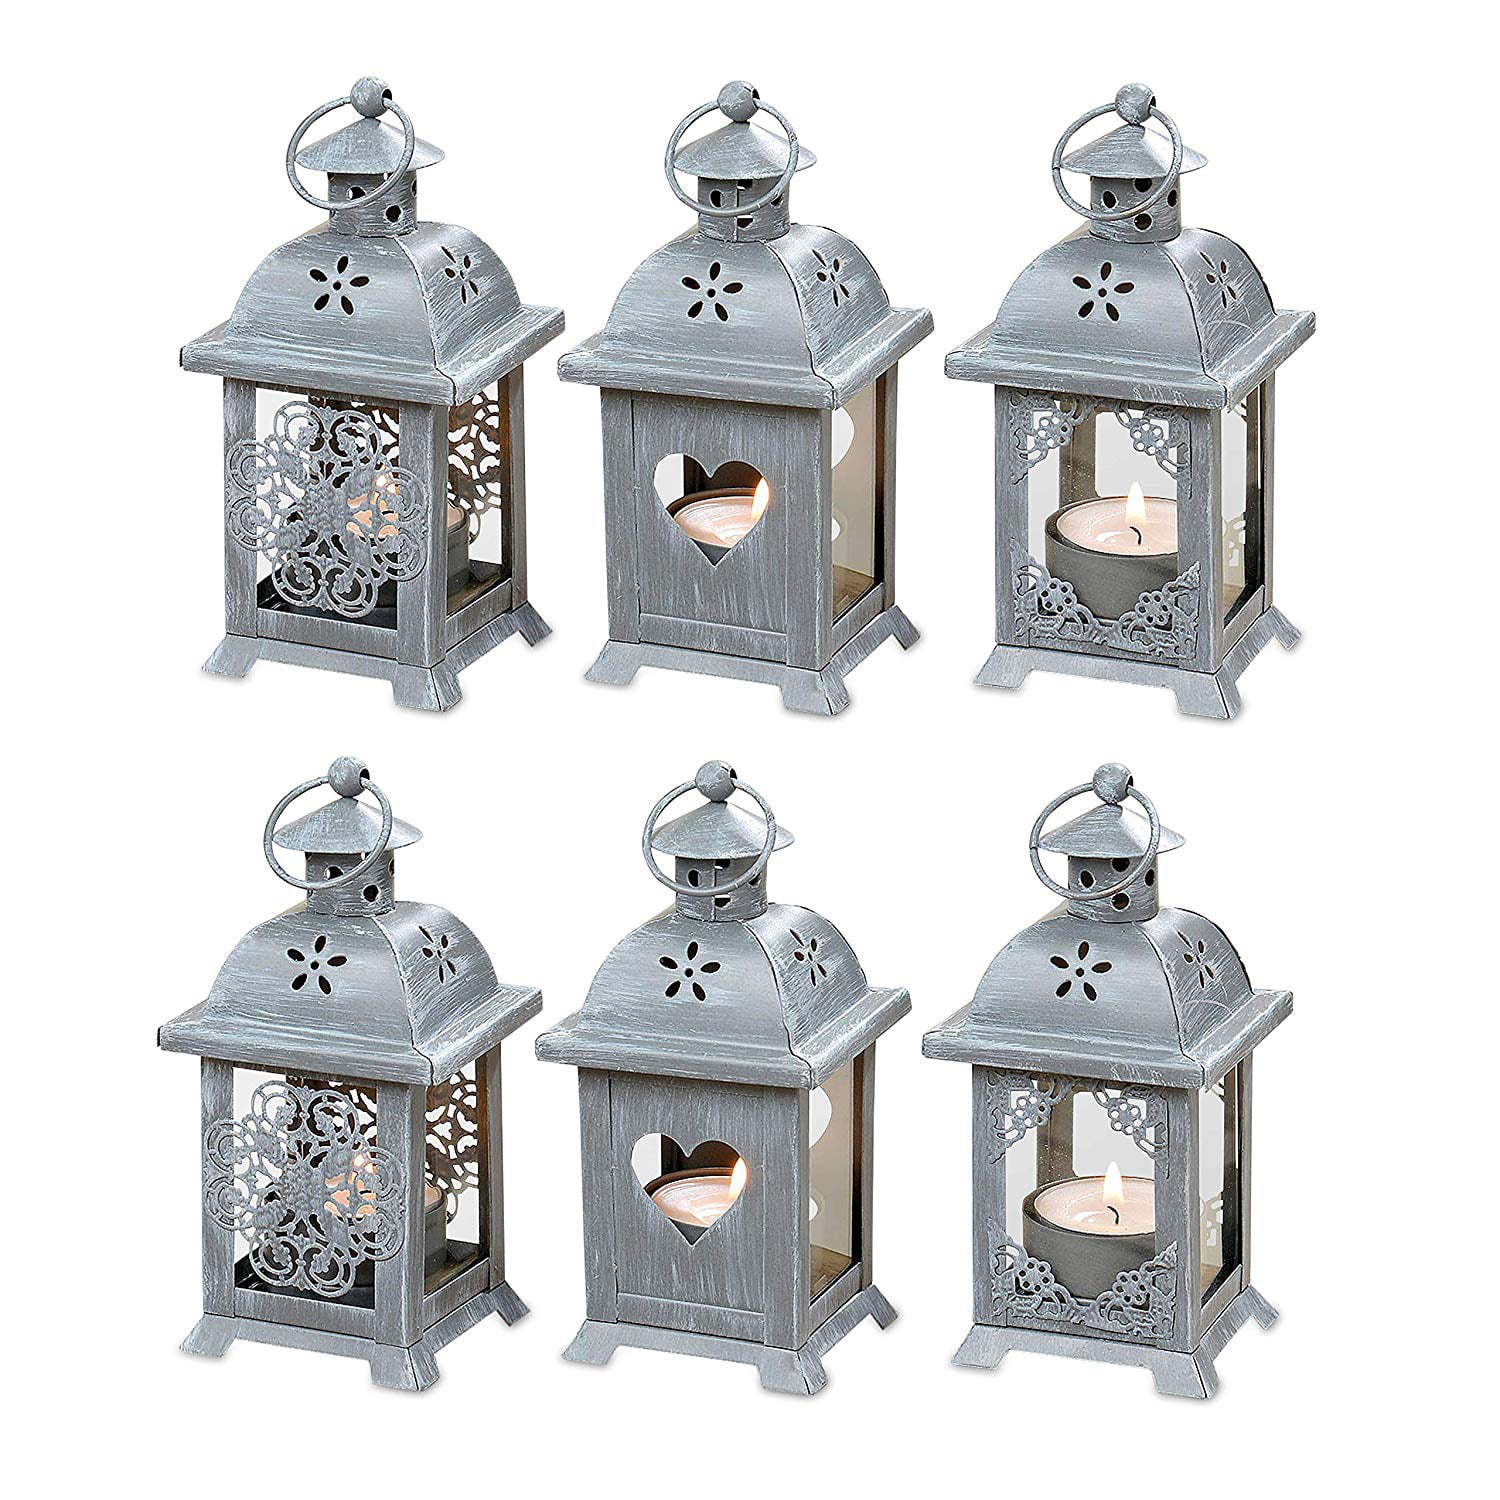 Romantic French Country Style Hearts, Flowers and Lace, Candle Lanterns,  Set of 6, LED Tea Light Holders, 2 3/4 x 2 3/4 x 5 1/2 Inches (7 x 7 x 14  cm), Gray Metal and Glass - Walmart.com